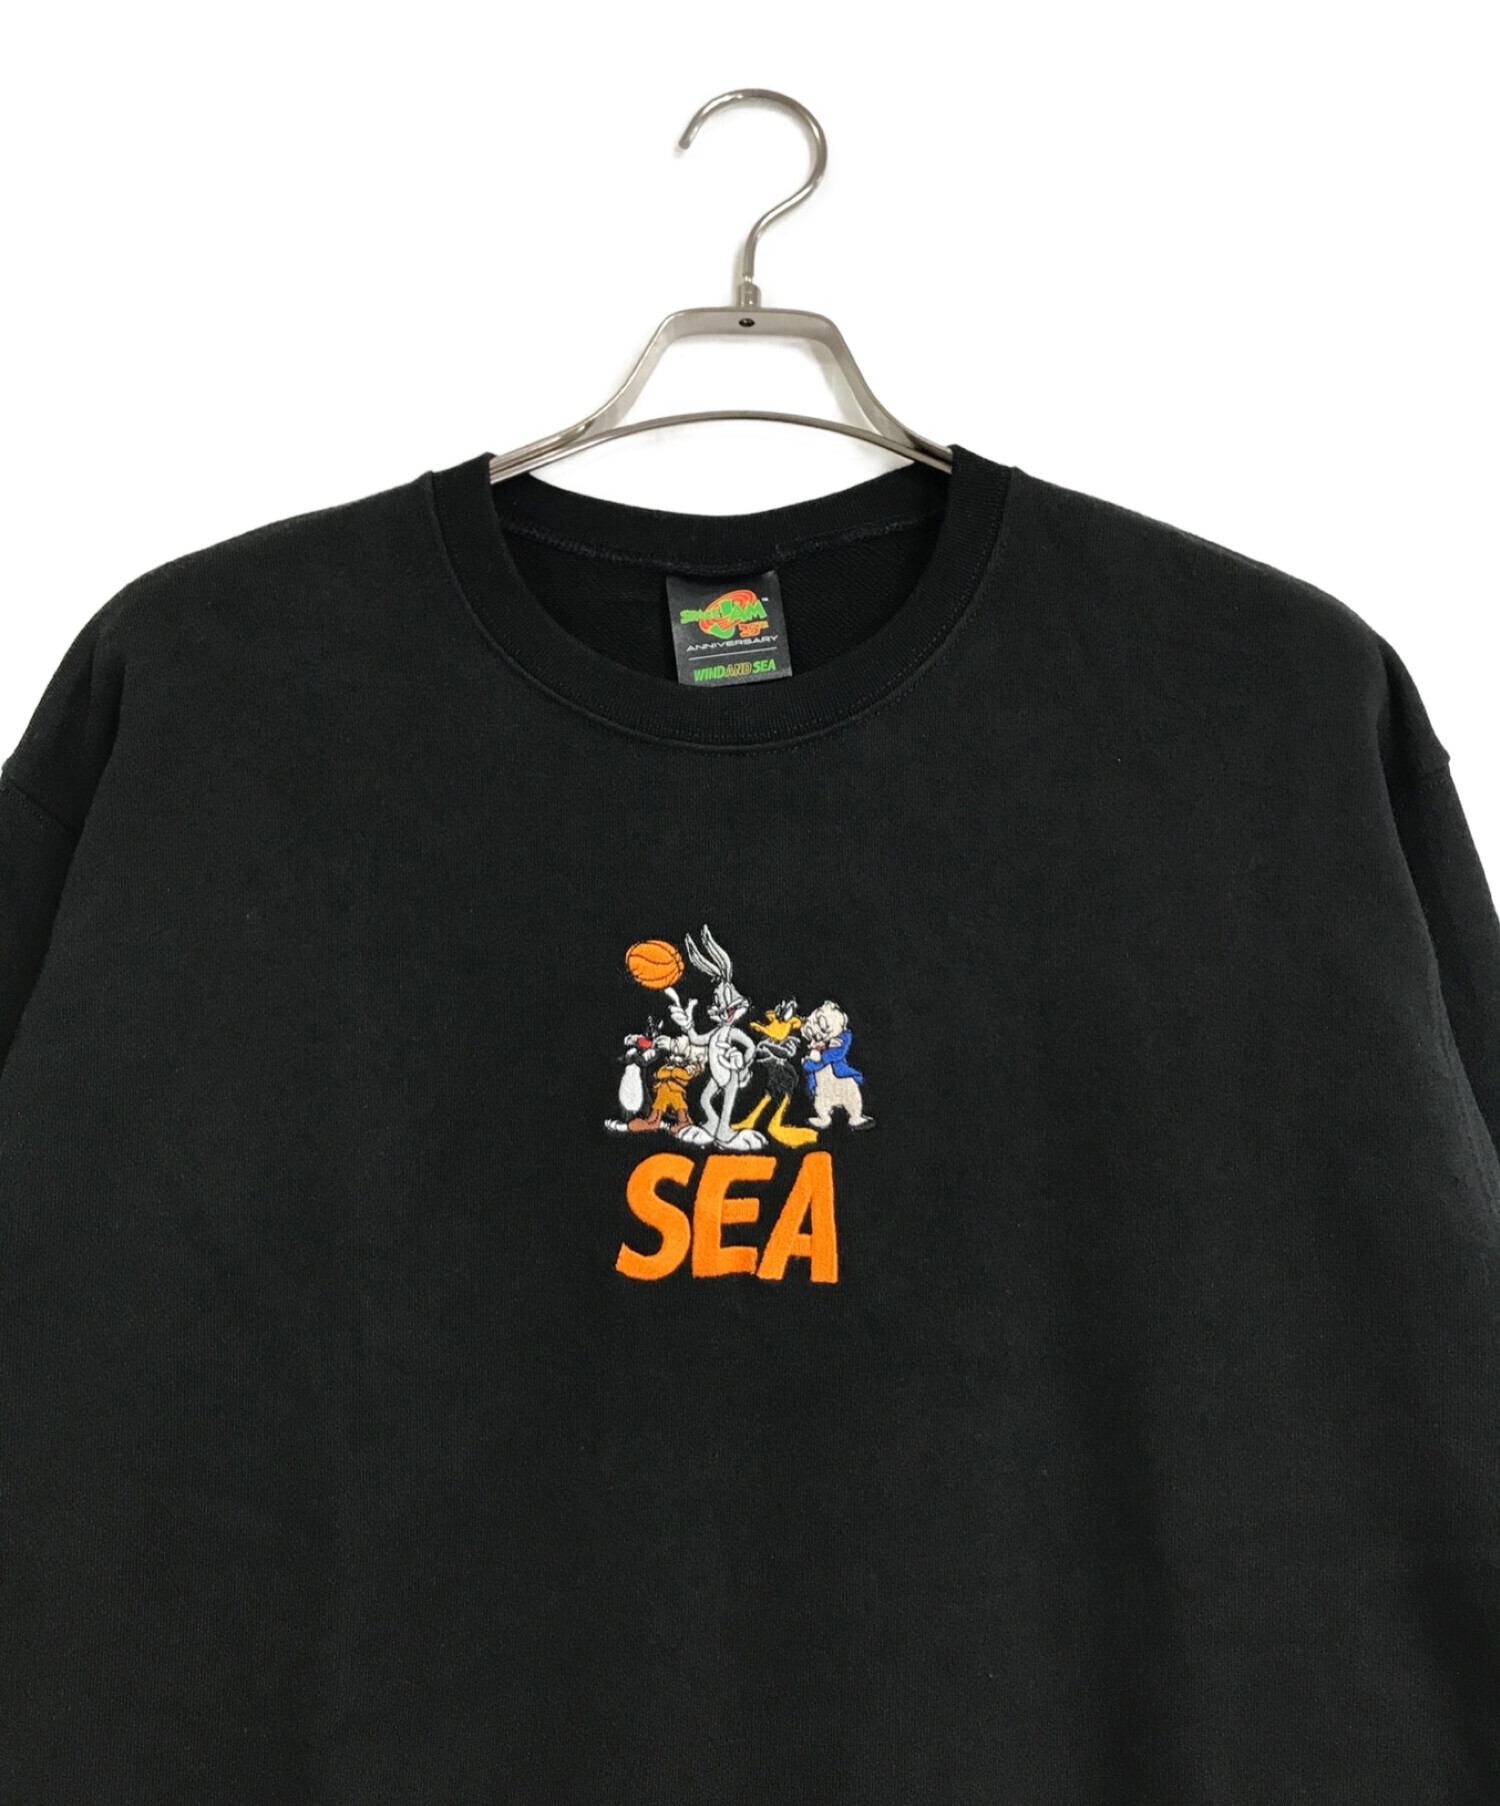 WIND AND SEA × SPACE JAM S/S TEE XL